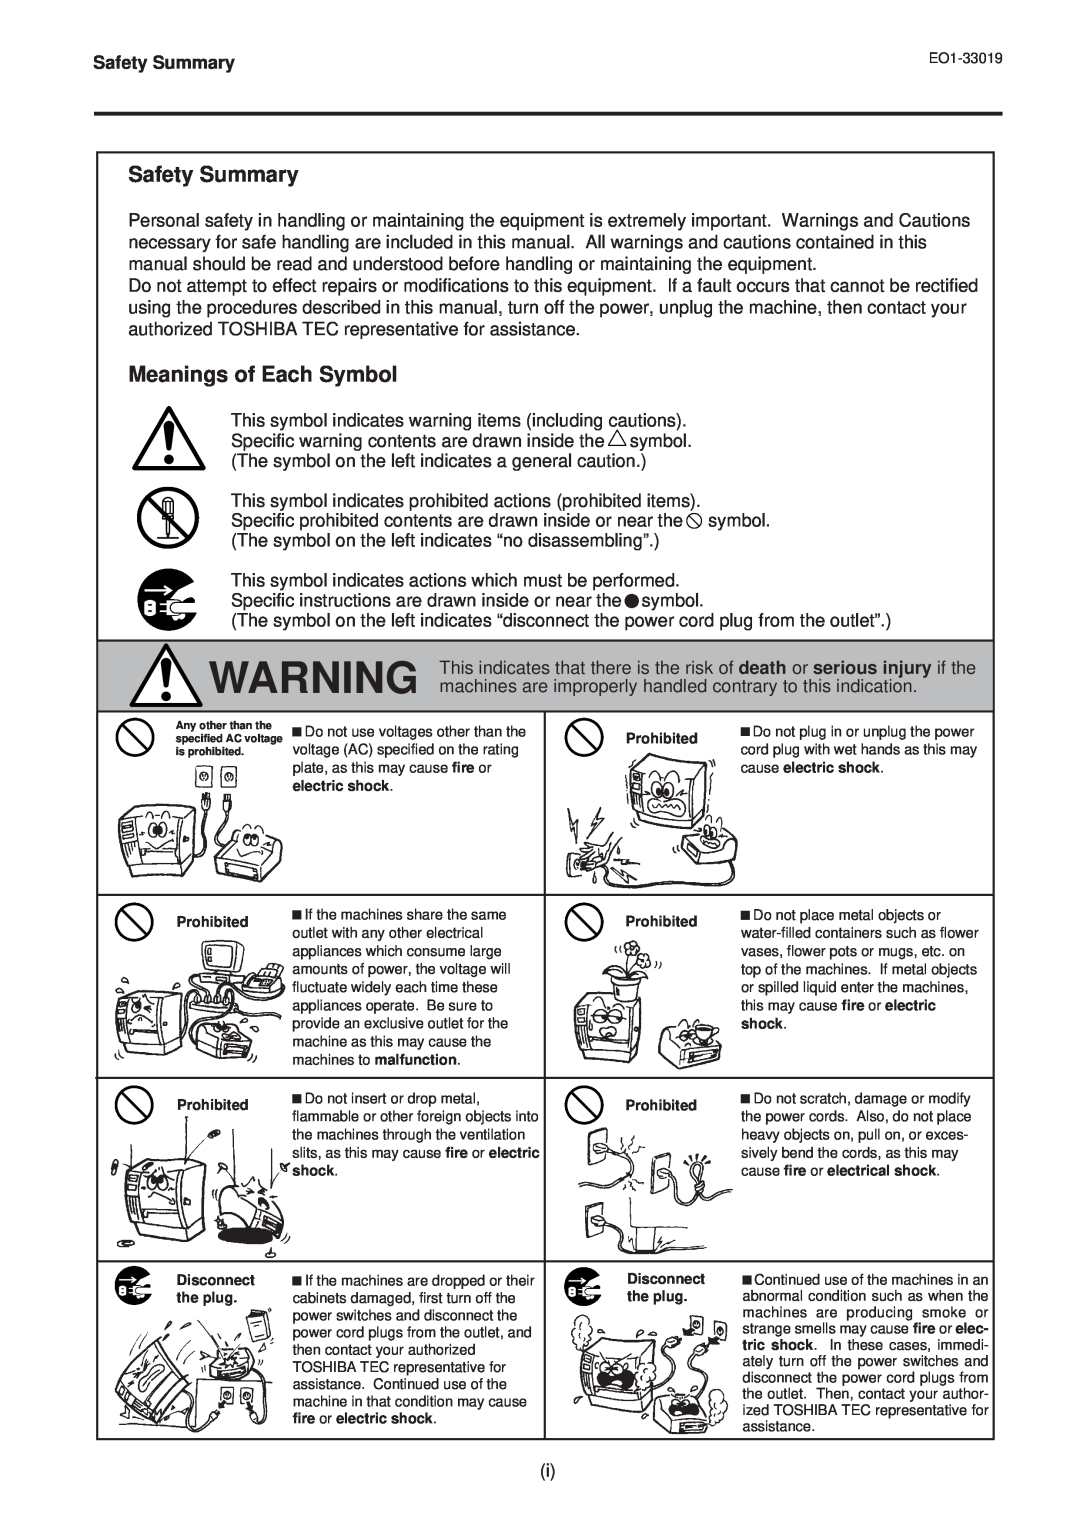 Toshiba B-450-HS-QQ owner manual Safety Summary, Meanings of Each Symbol 